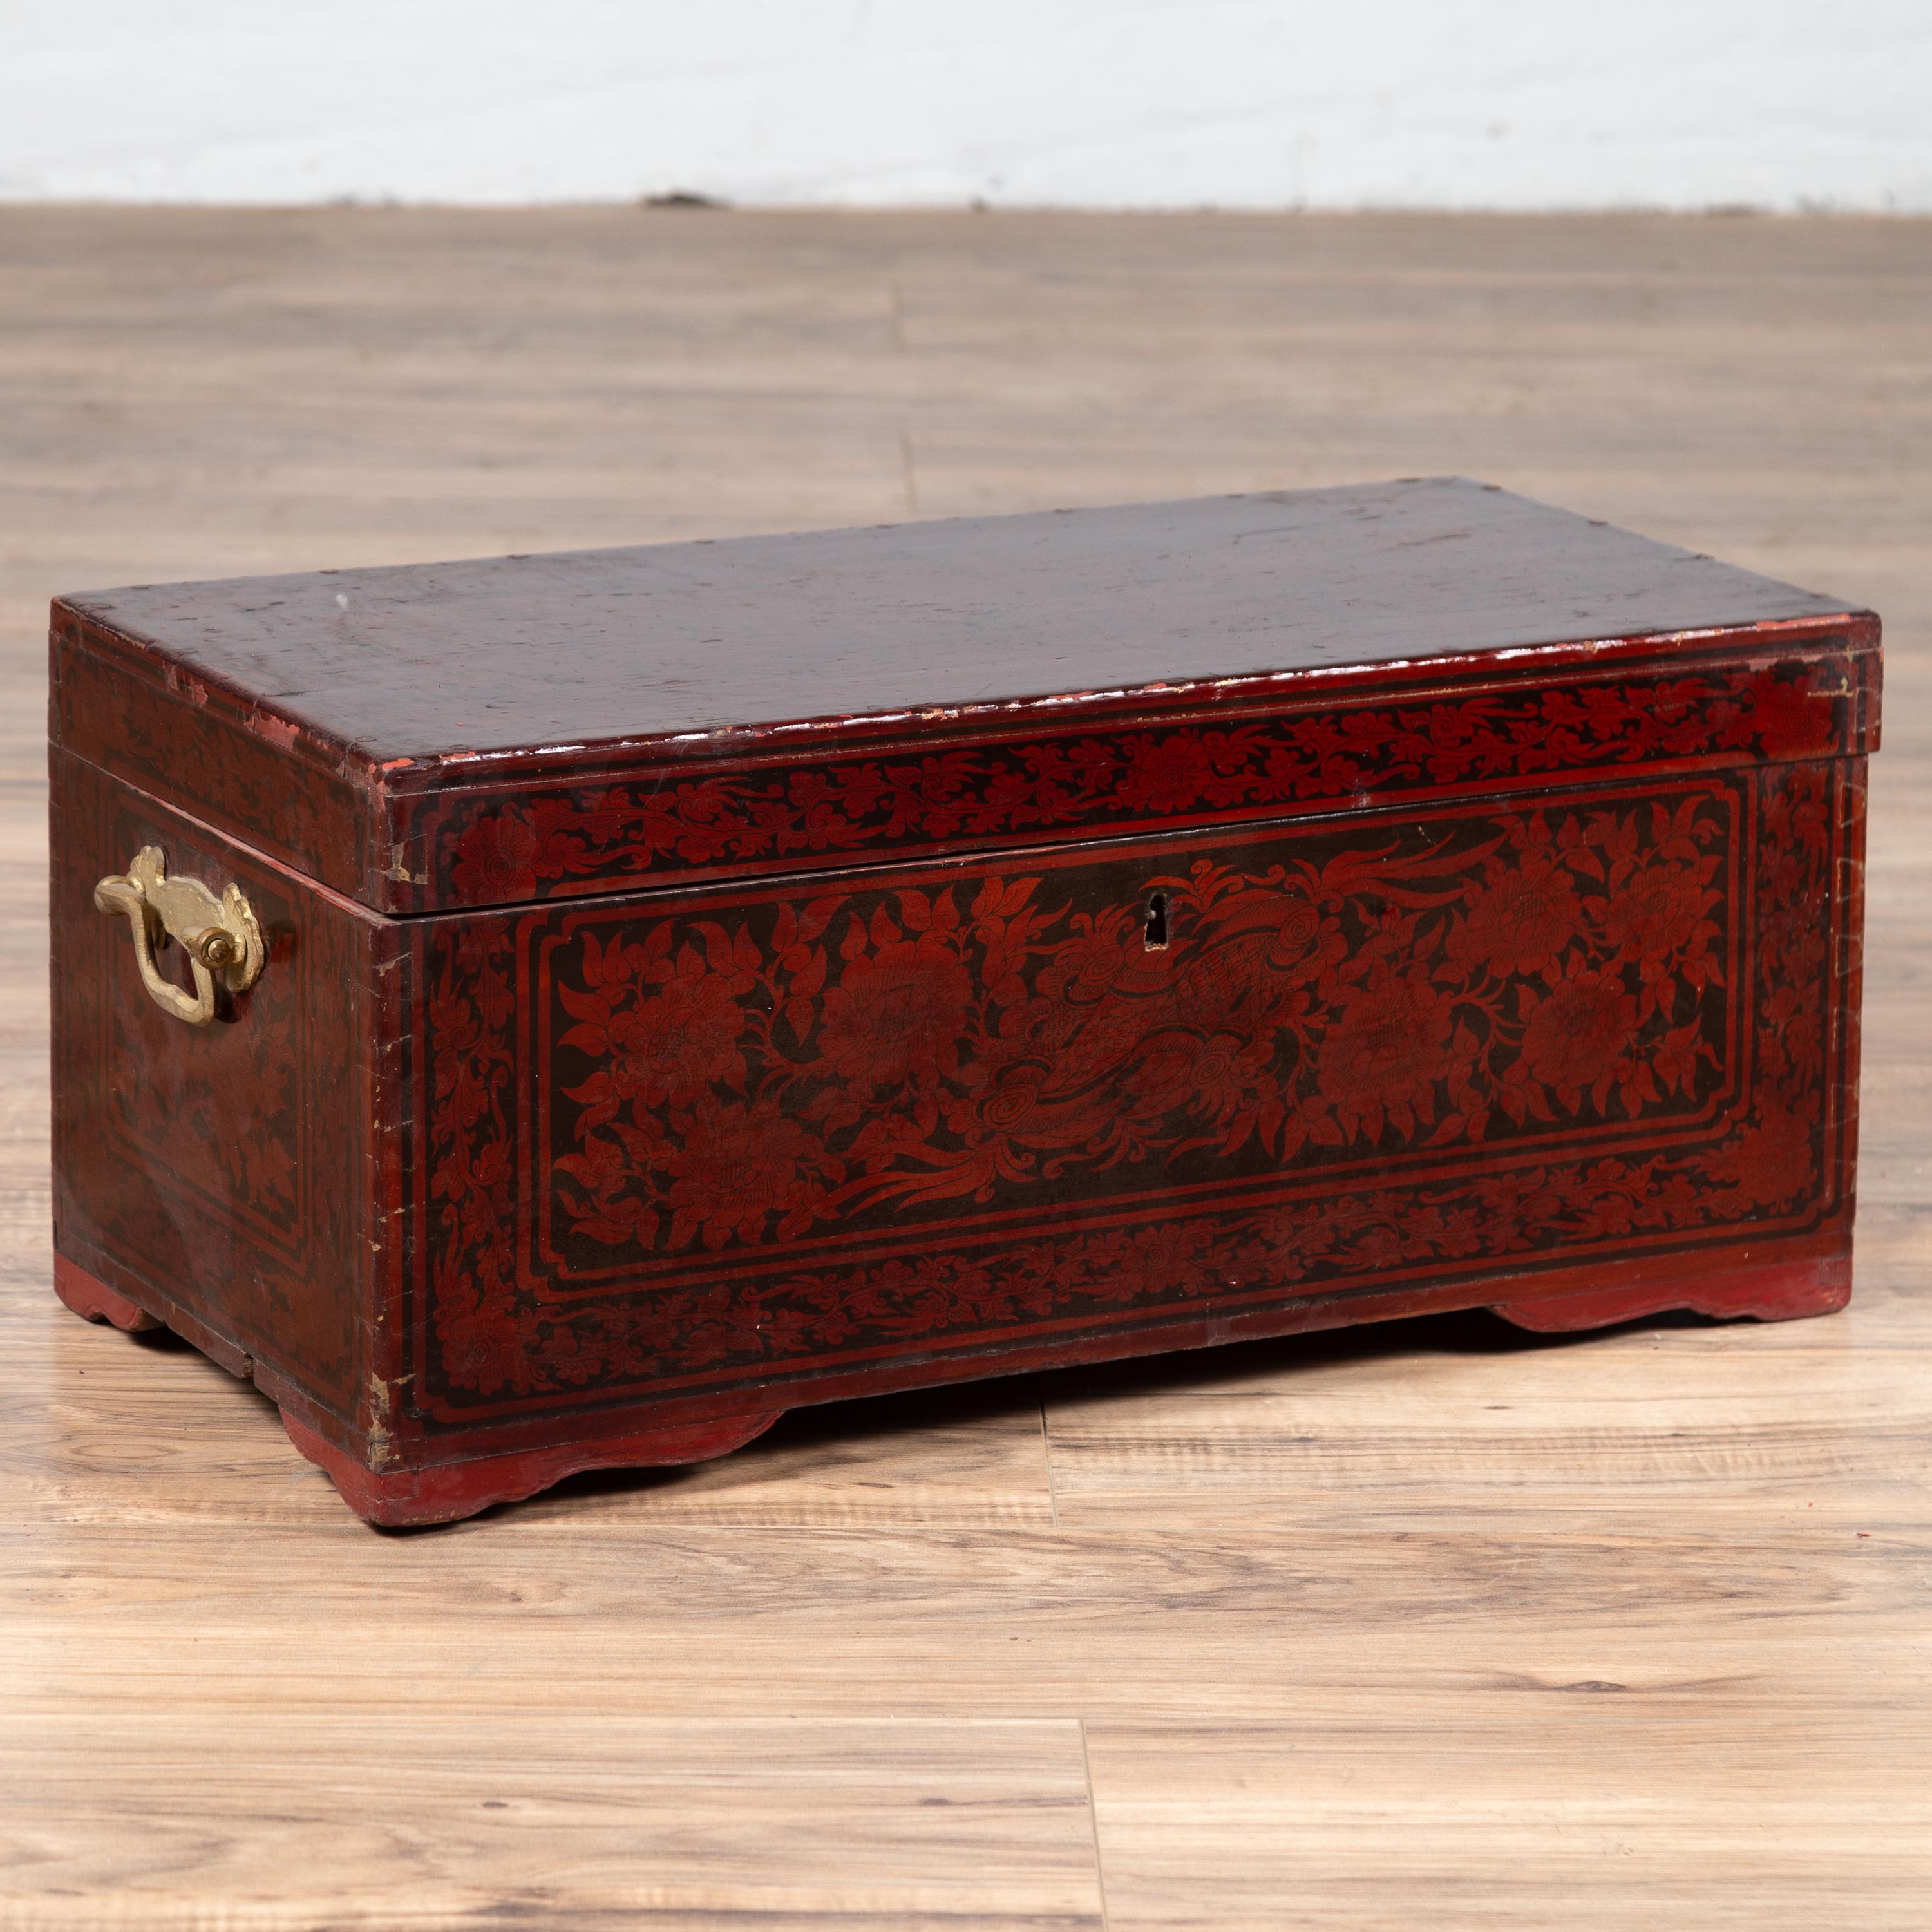 Vintage Lacquered Leather Chest with Burgundy Patina from Palembang, Sumatra 4